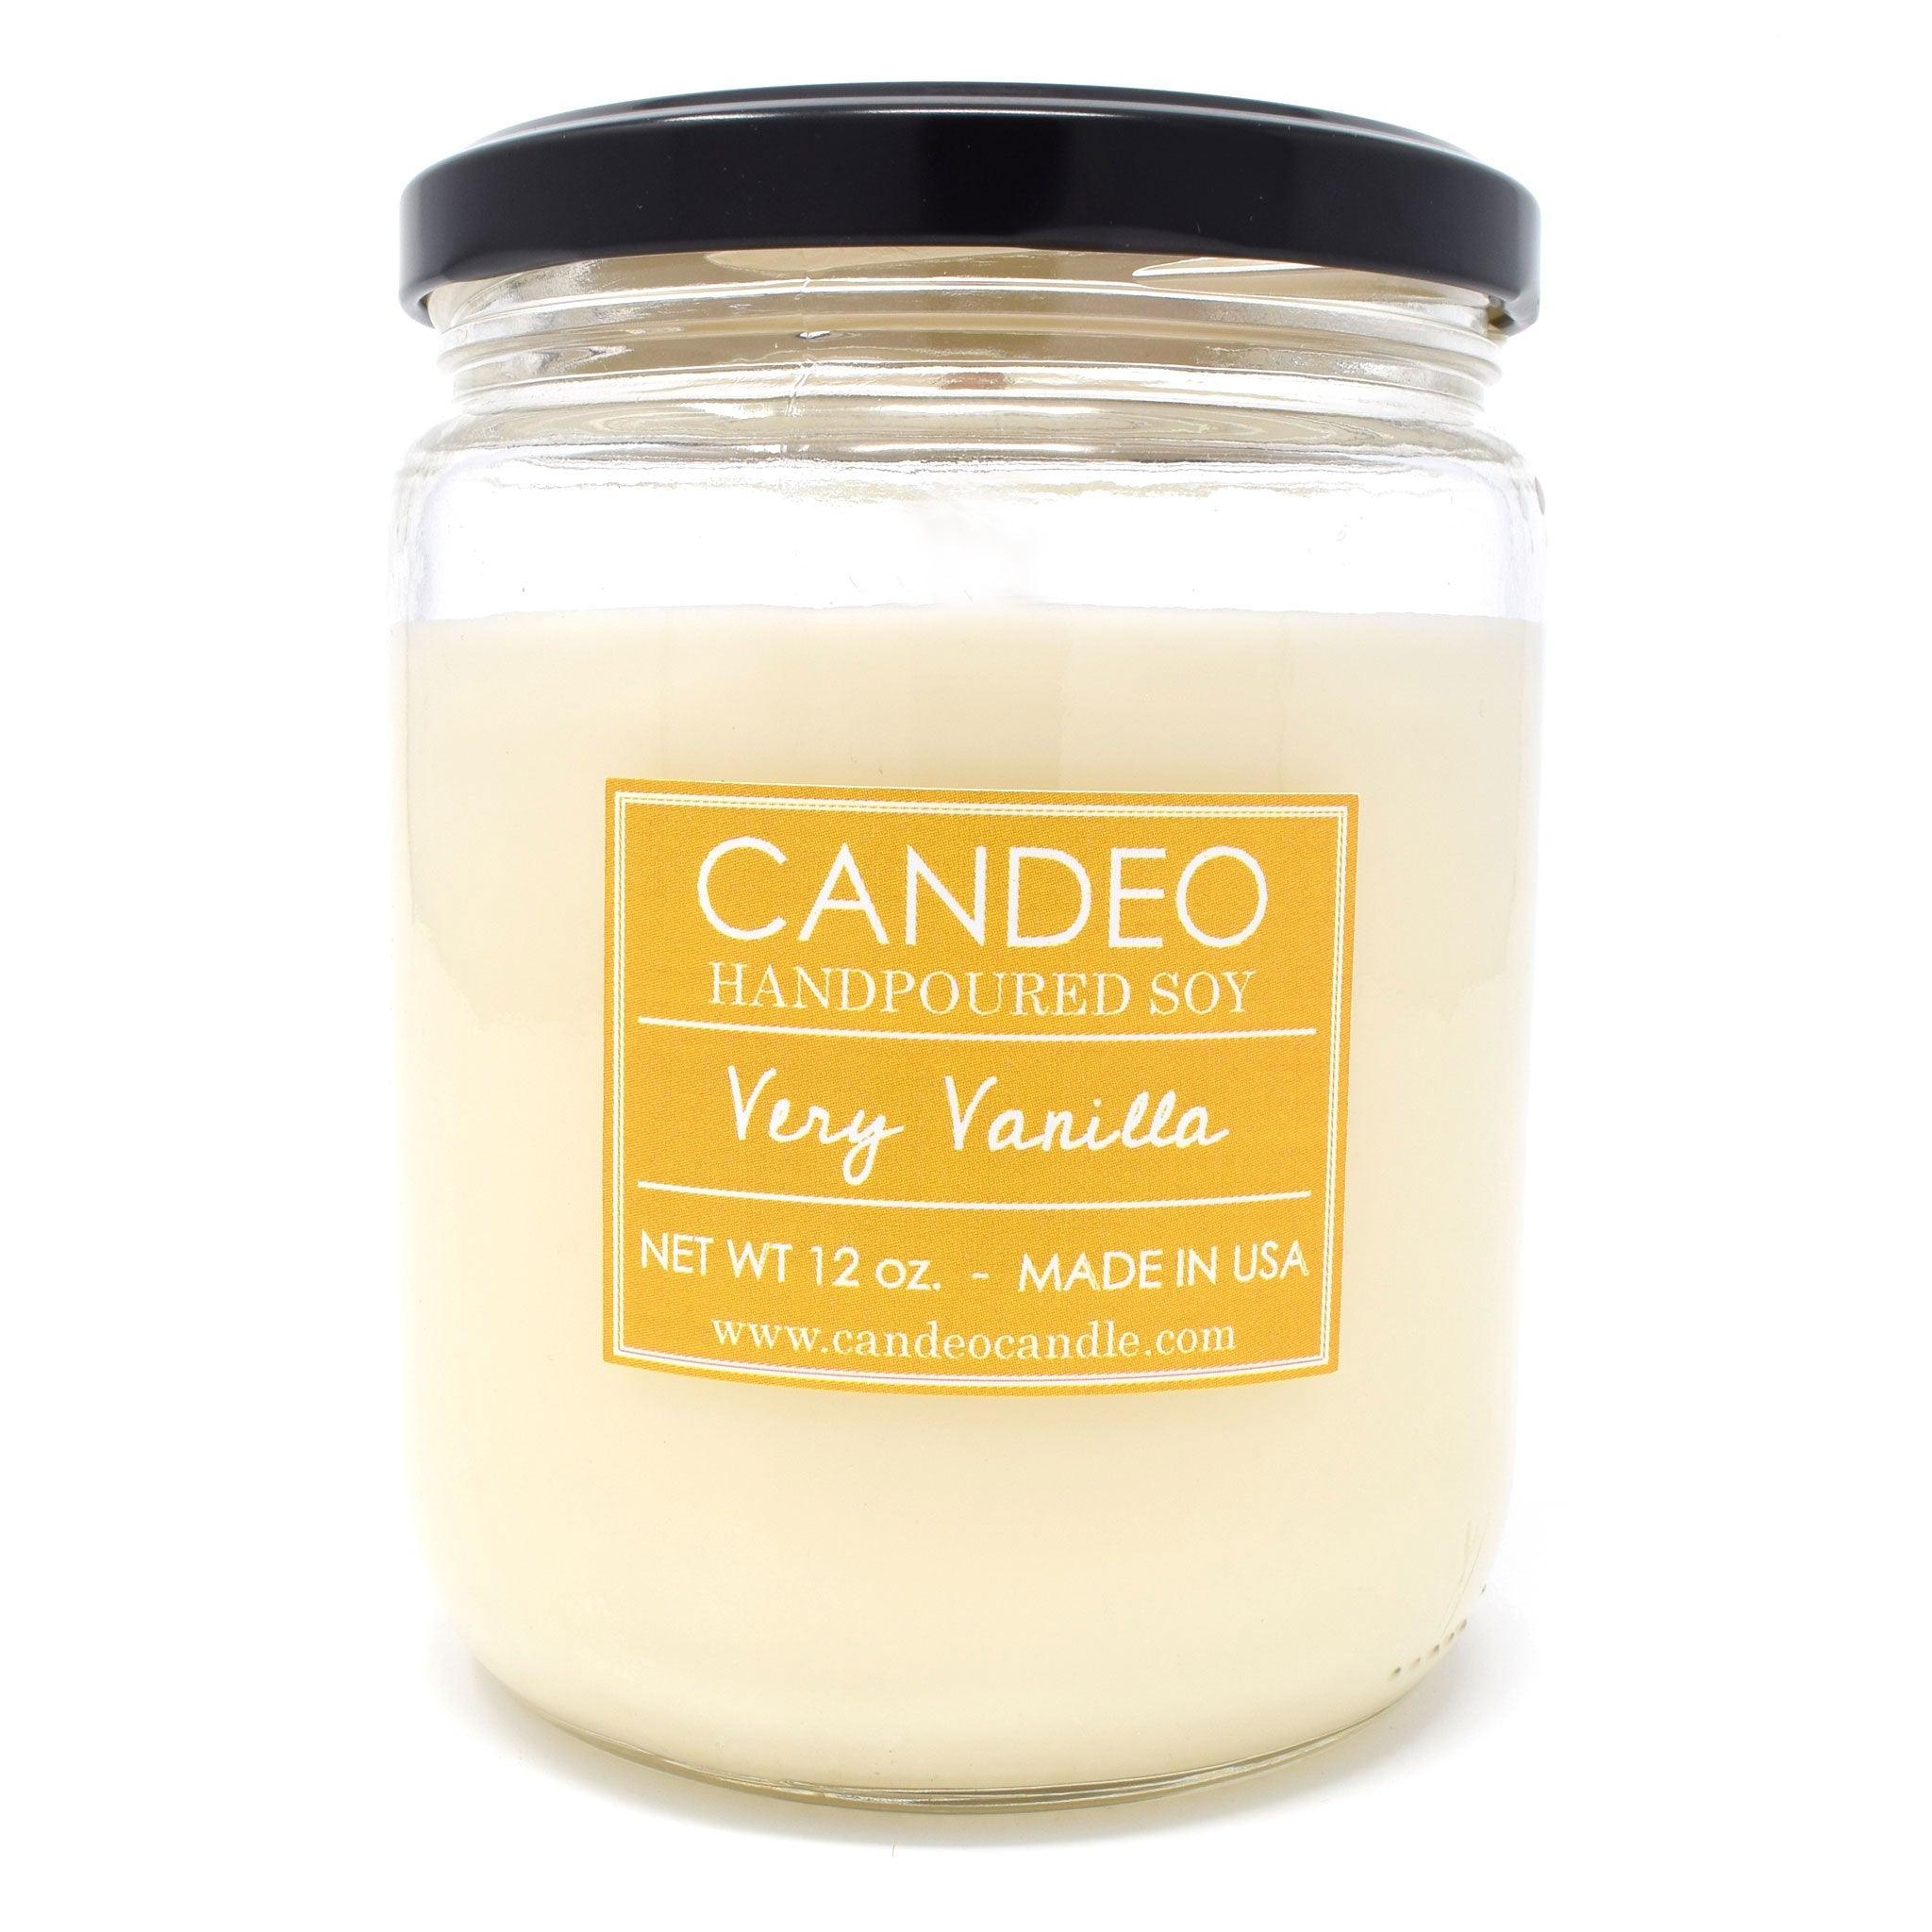 Very Vanilla, 14oz Soy Candle Jar - Candeo Candle